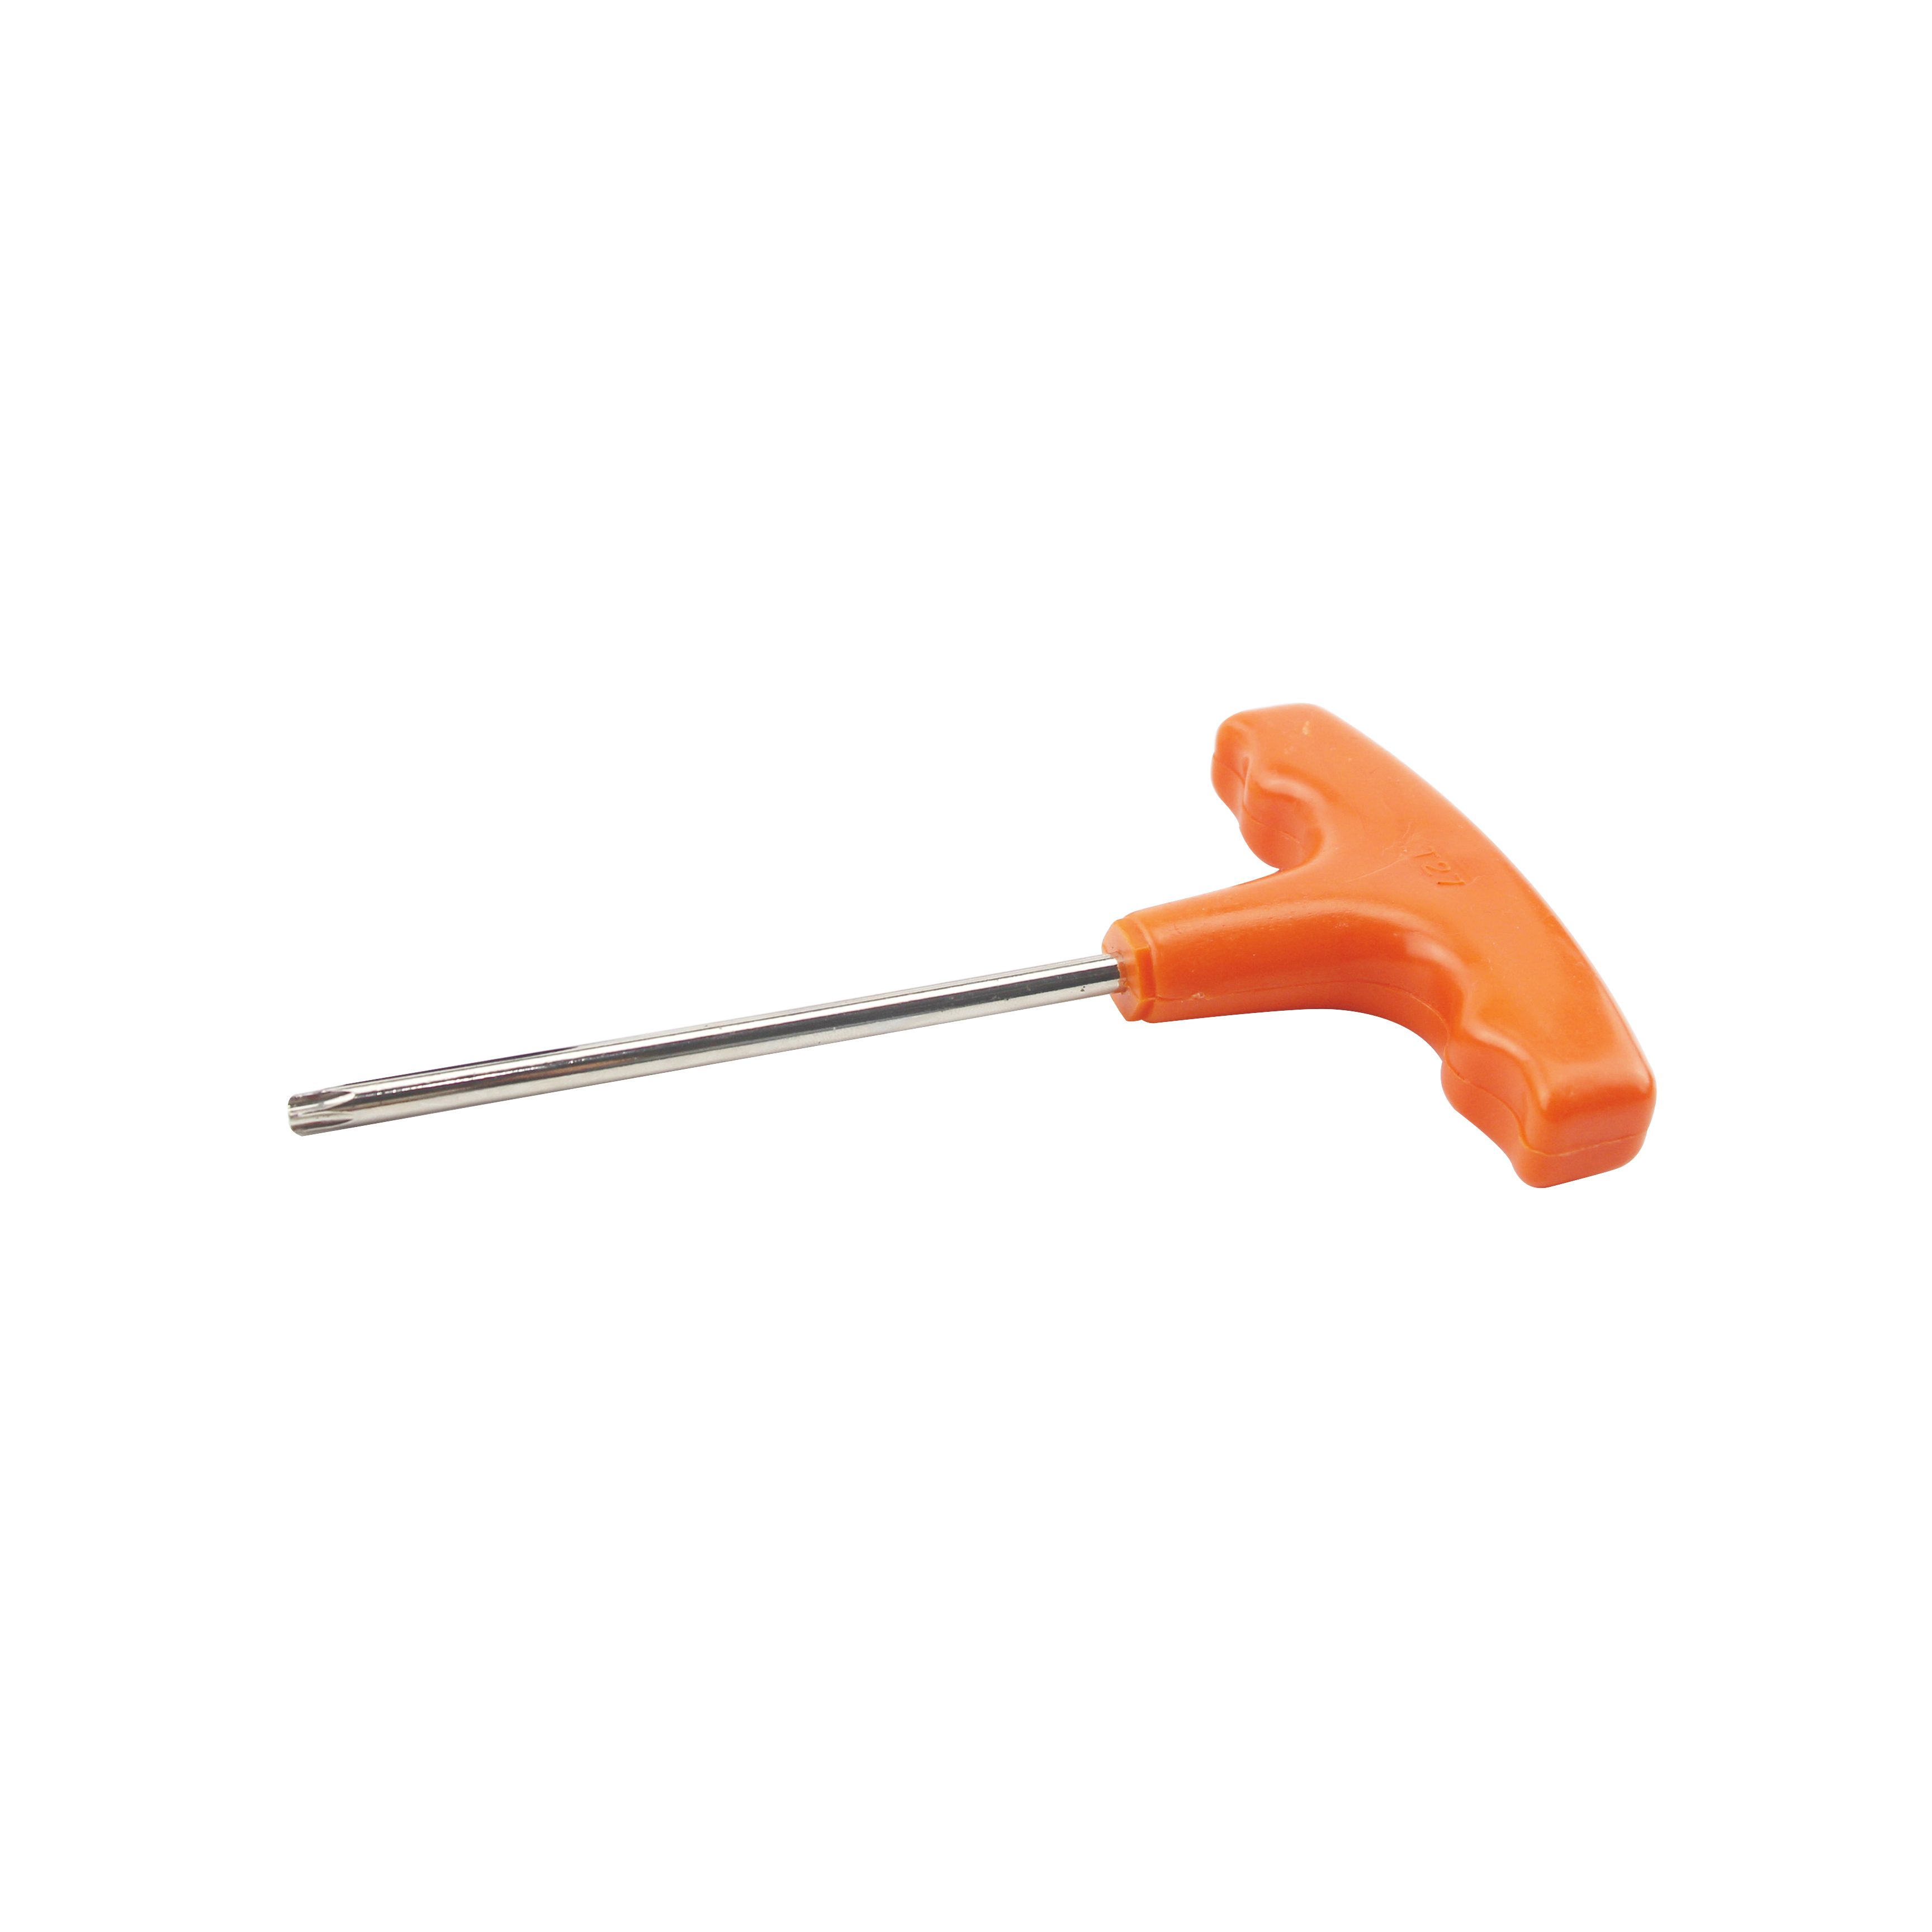 Holzfforma® T27 Screw Driver With T Handle For Stihl machines Replace OEM 0812 370 1000